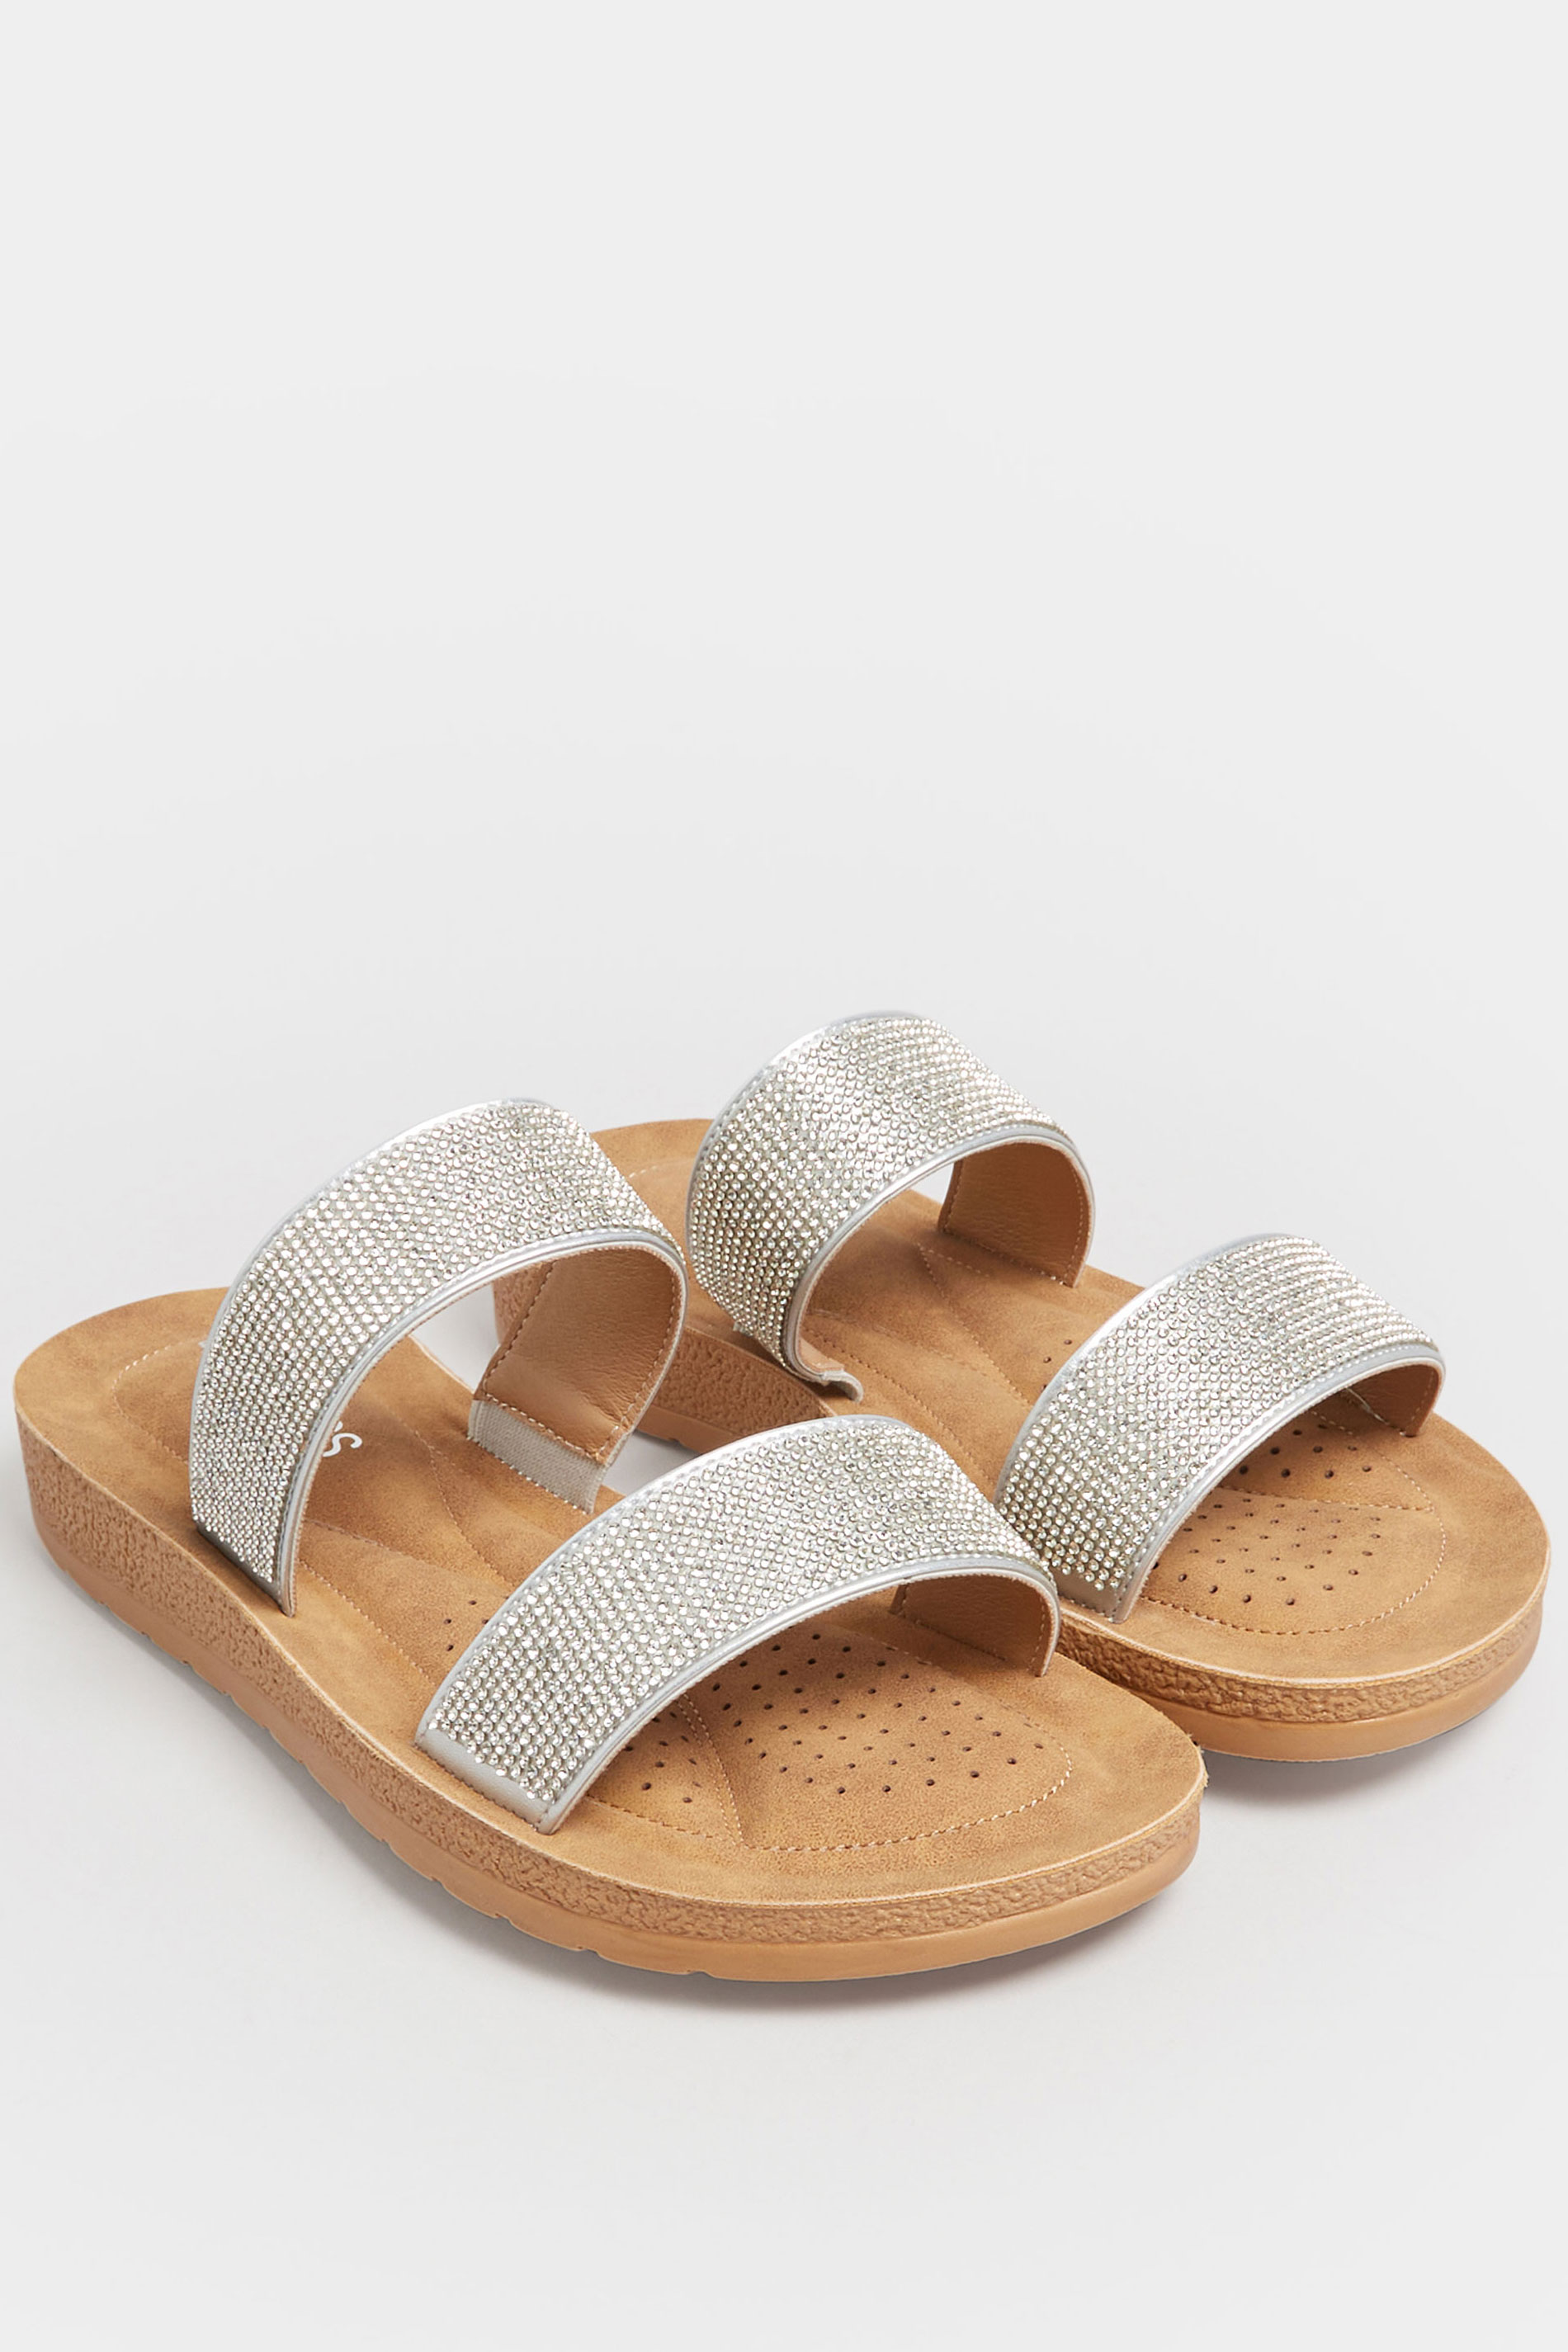 Silver & Brown Glitter Strap Mule Sandals In Extra Wide EEE Fit | Yours Clothing  2